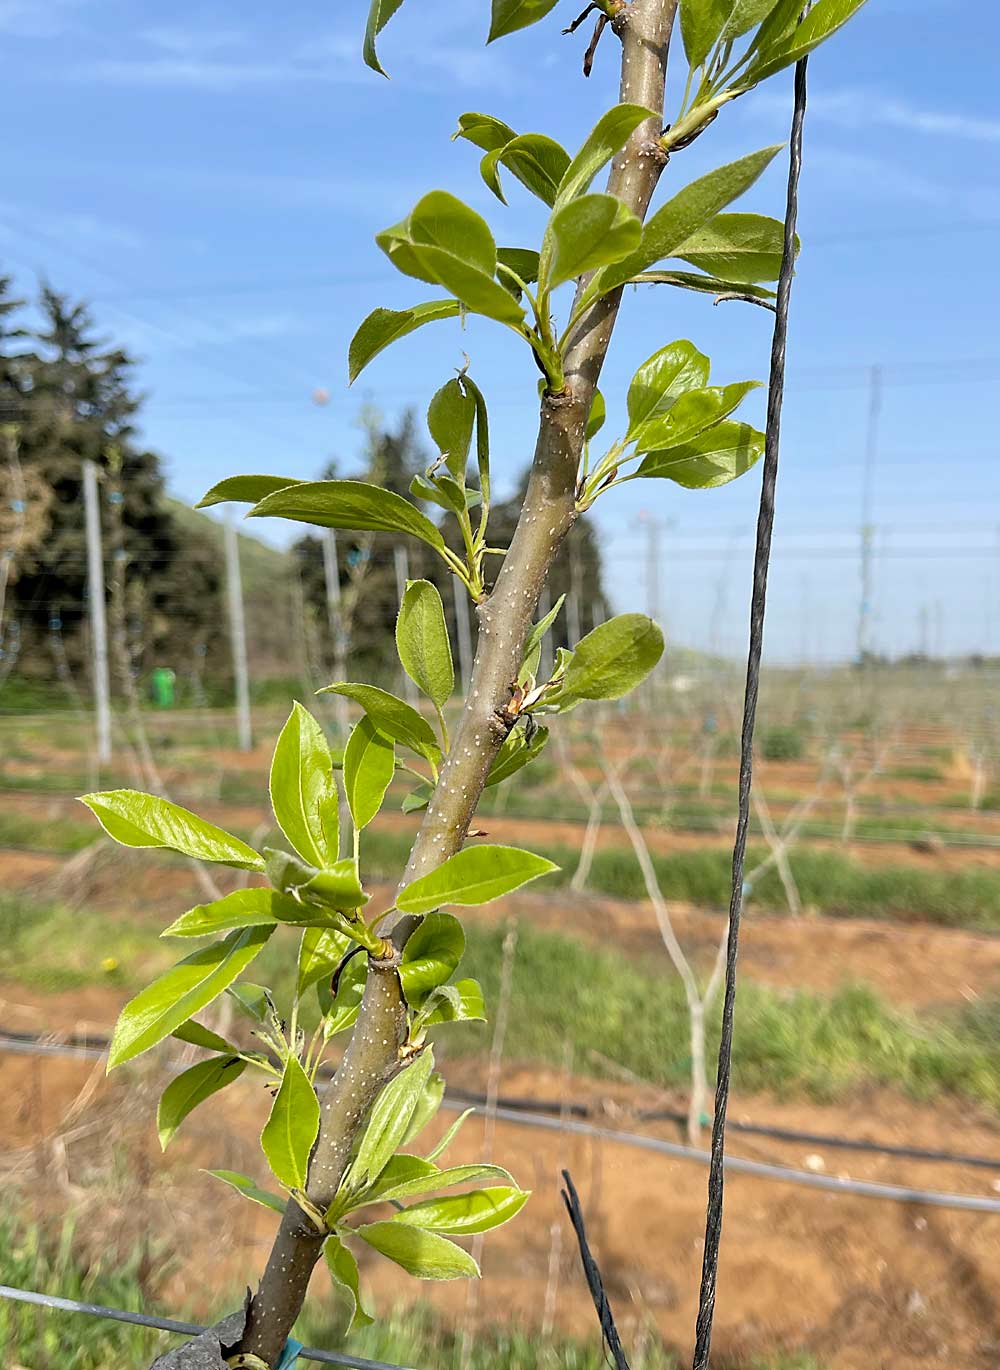 After selecting two leaders on each tree, encourage maximum growth of the leaders by removing any sylleptic shoots. Keep tying the growing leaders to the guide wires with a tapener. (Courtesy Bas van den Ende)